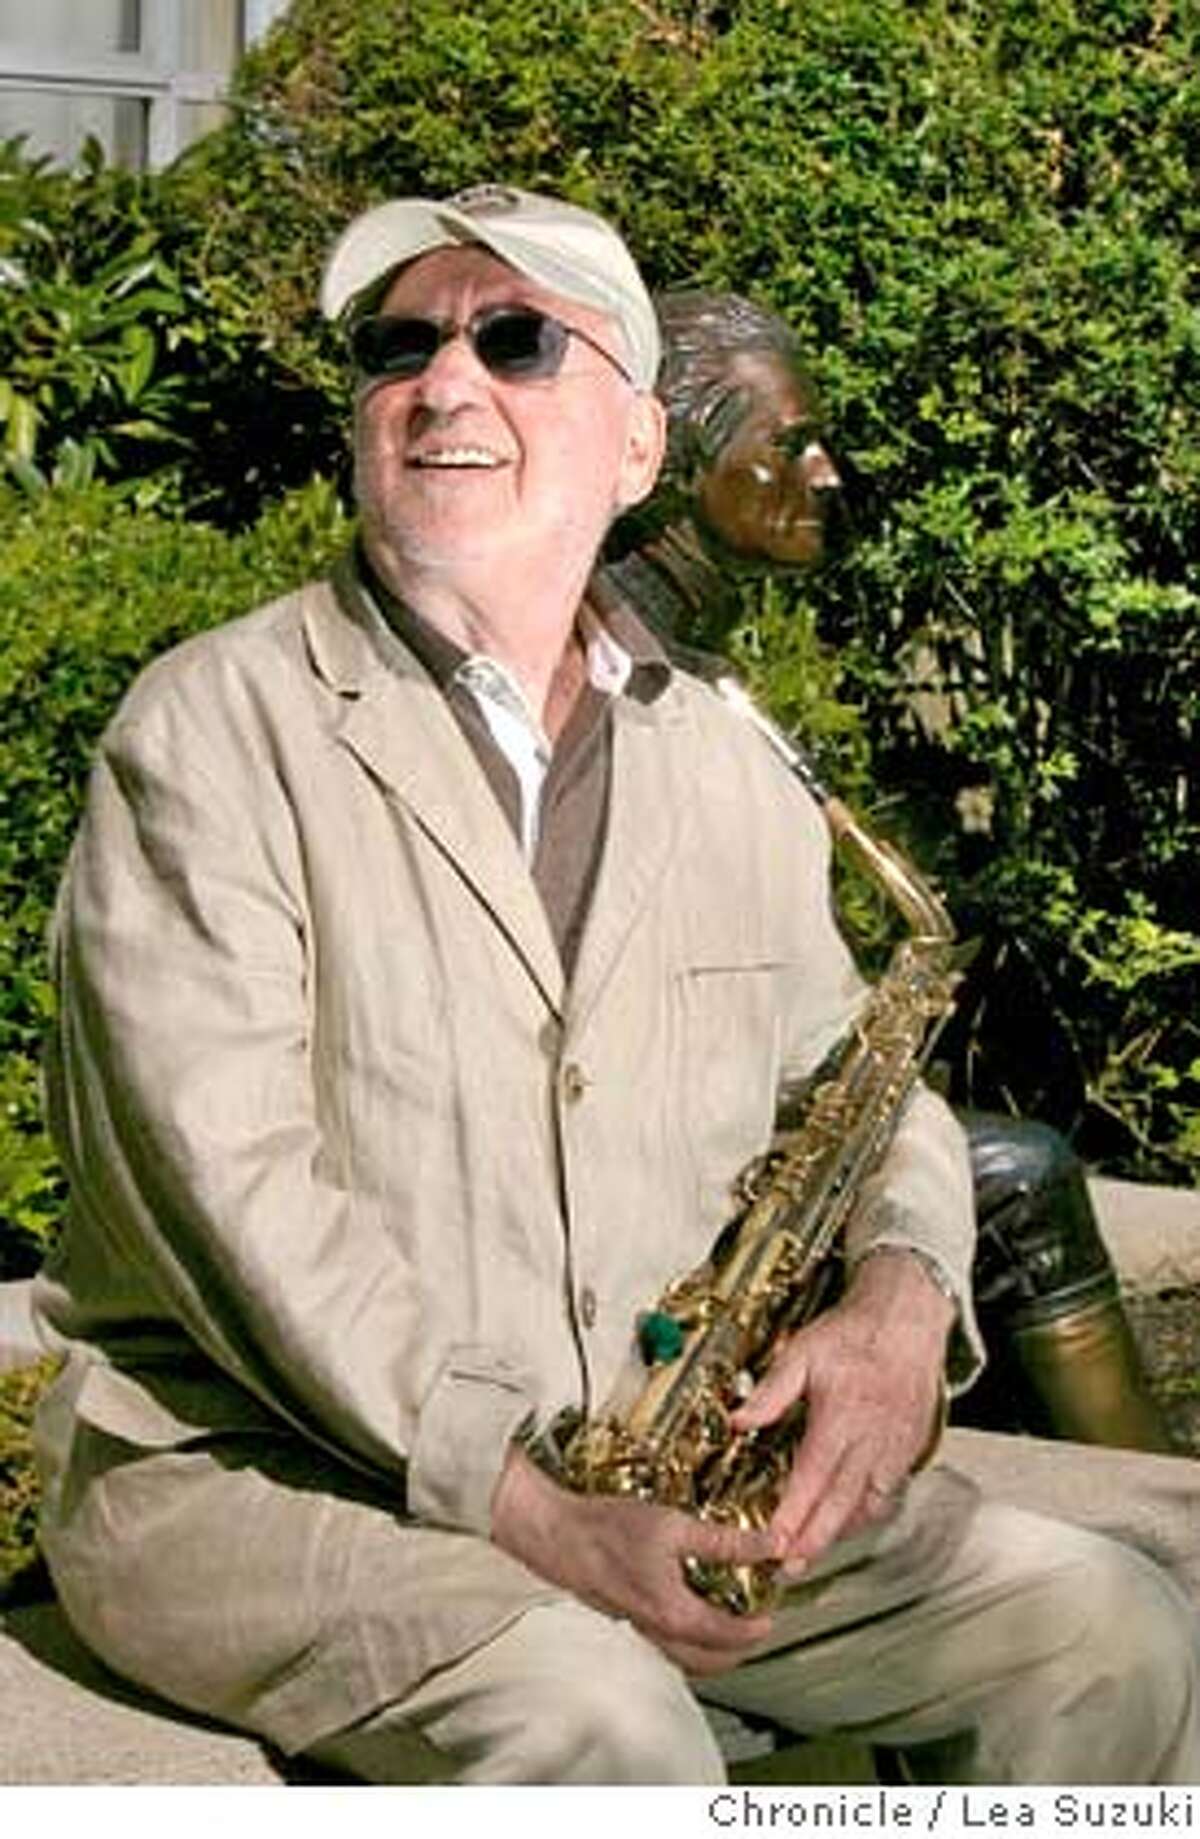 konitz02_0005_ls.JPG Saxophonist Lee Konitz. Photo taken on 072907 in Menlo Park, CA. Photo by Lea Suzuki/ The Chronicle (Lee Konitz)cq MANDATORY CREDIT FOR PHOTOG AND SF CHRONICLE/NO SALES-MAGS OUT.